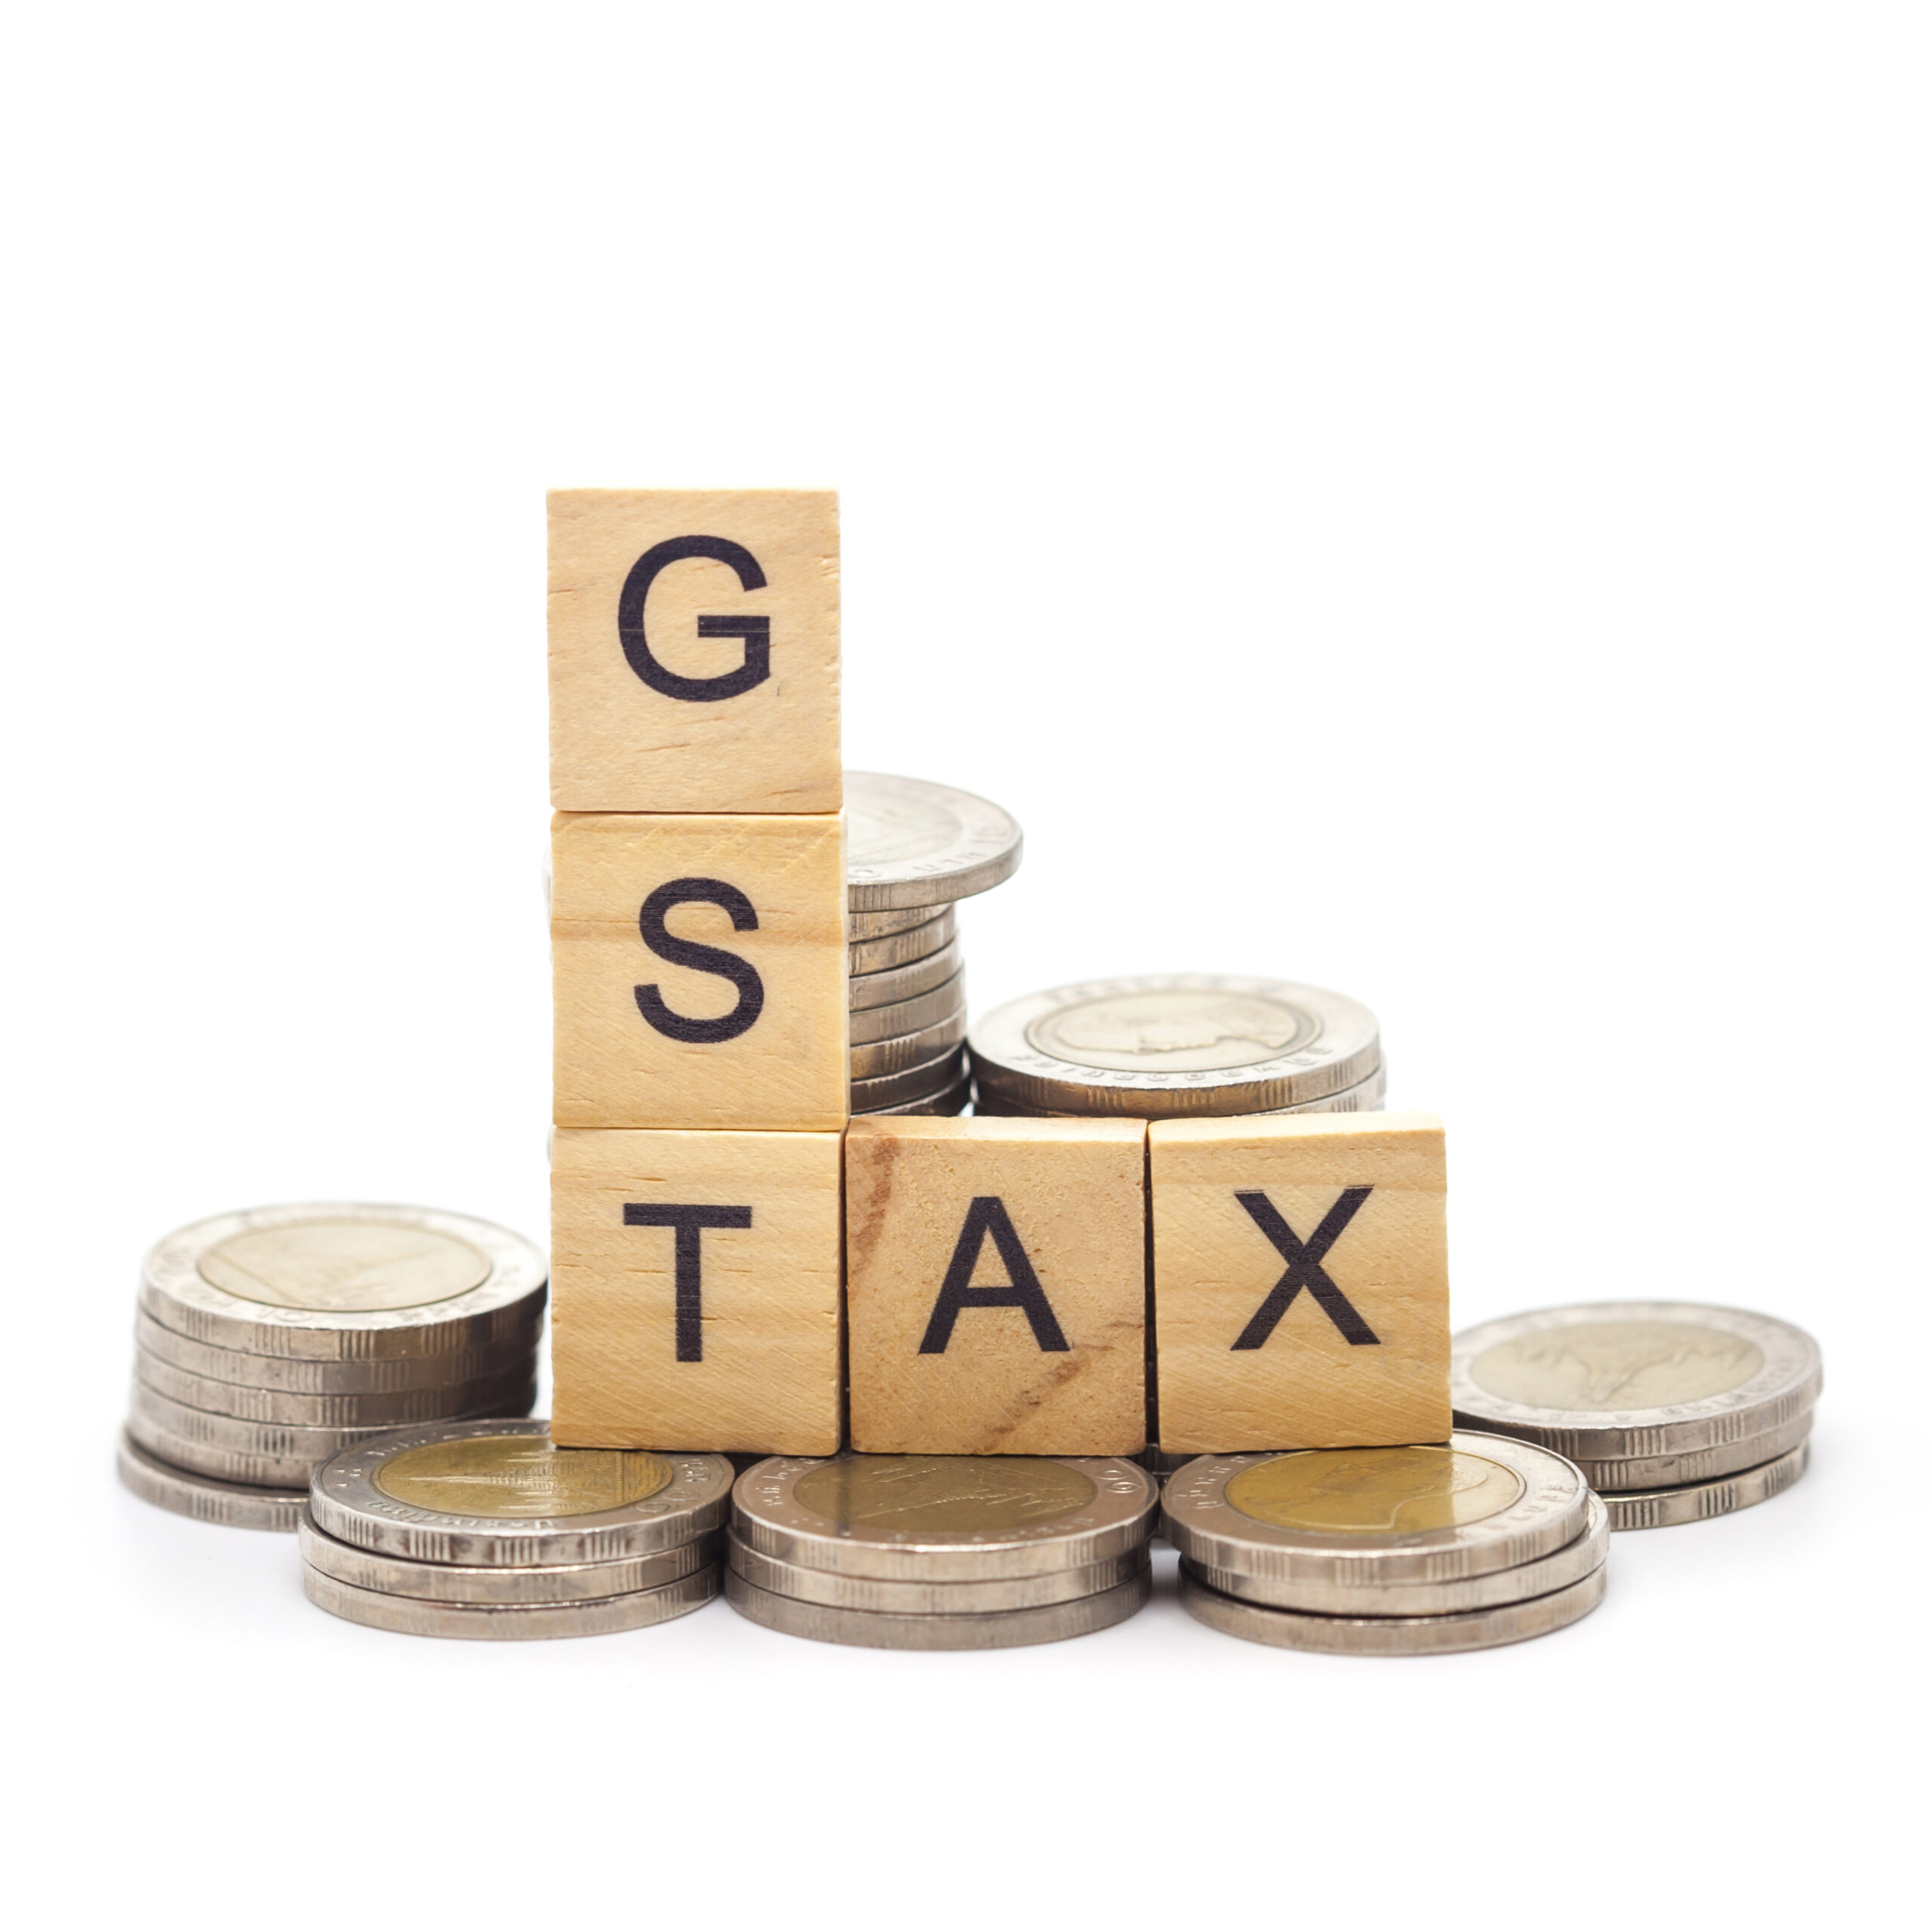 Goods and Services Tax word on stack coins isolate .